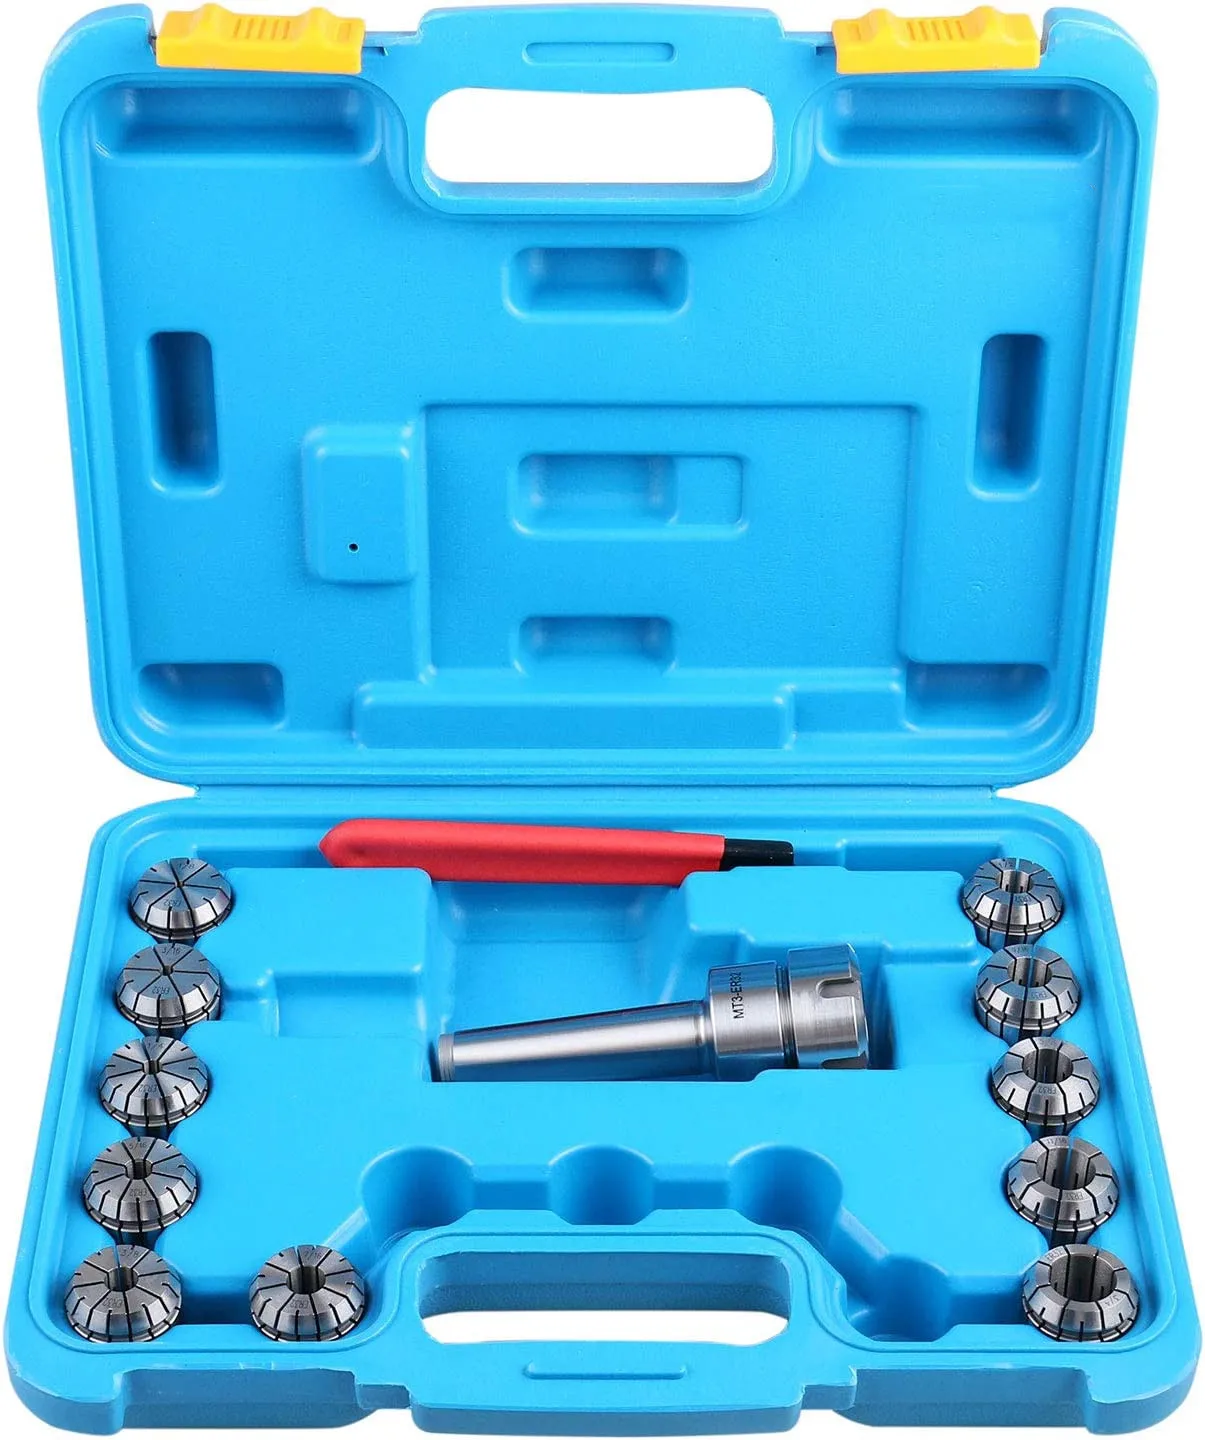 Mt3 Shank Er32 Chuck with 11Pc Collets Kit,1/8''-3/4'' by 16Th,Morse Taper Collet System Hand Tools,Workholding Devices